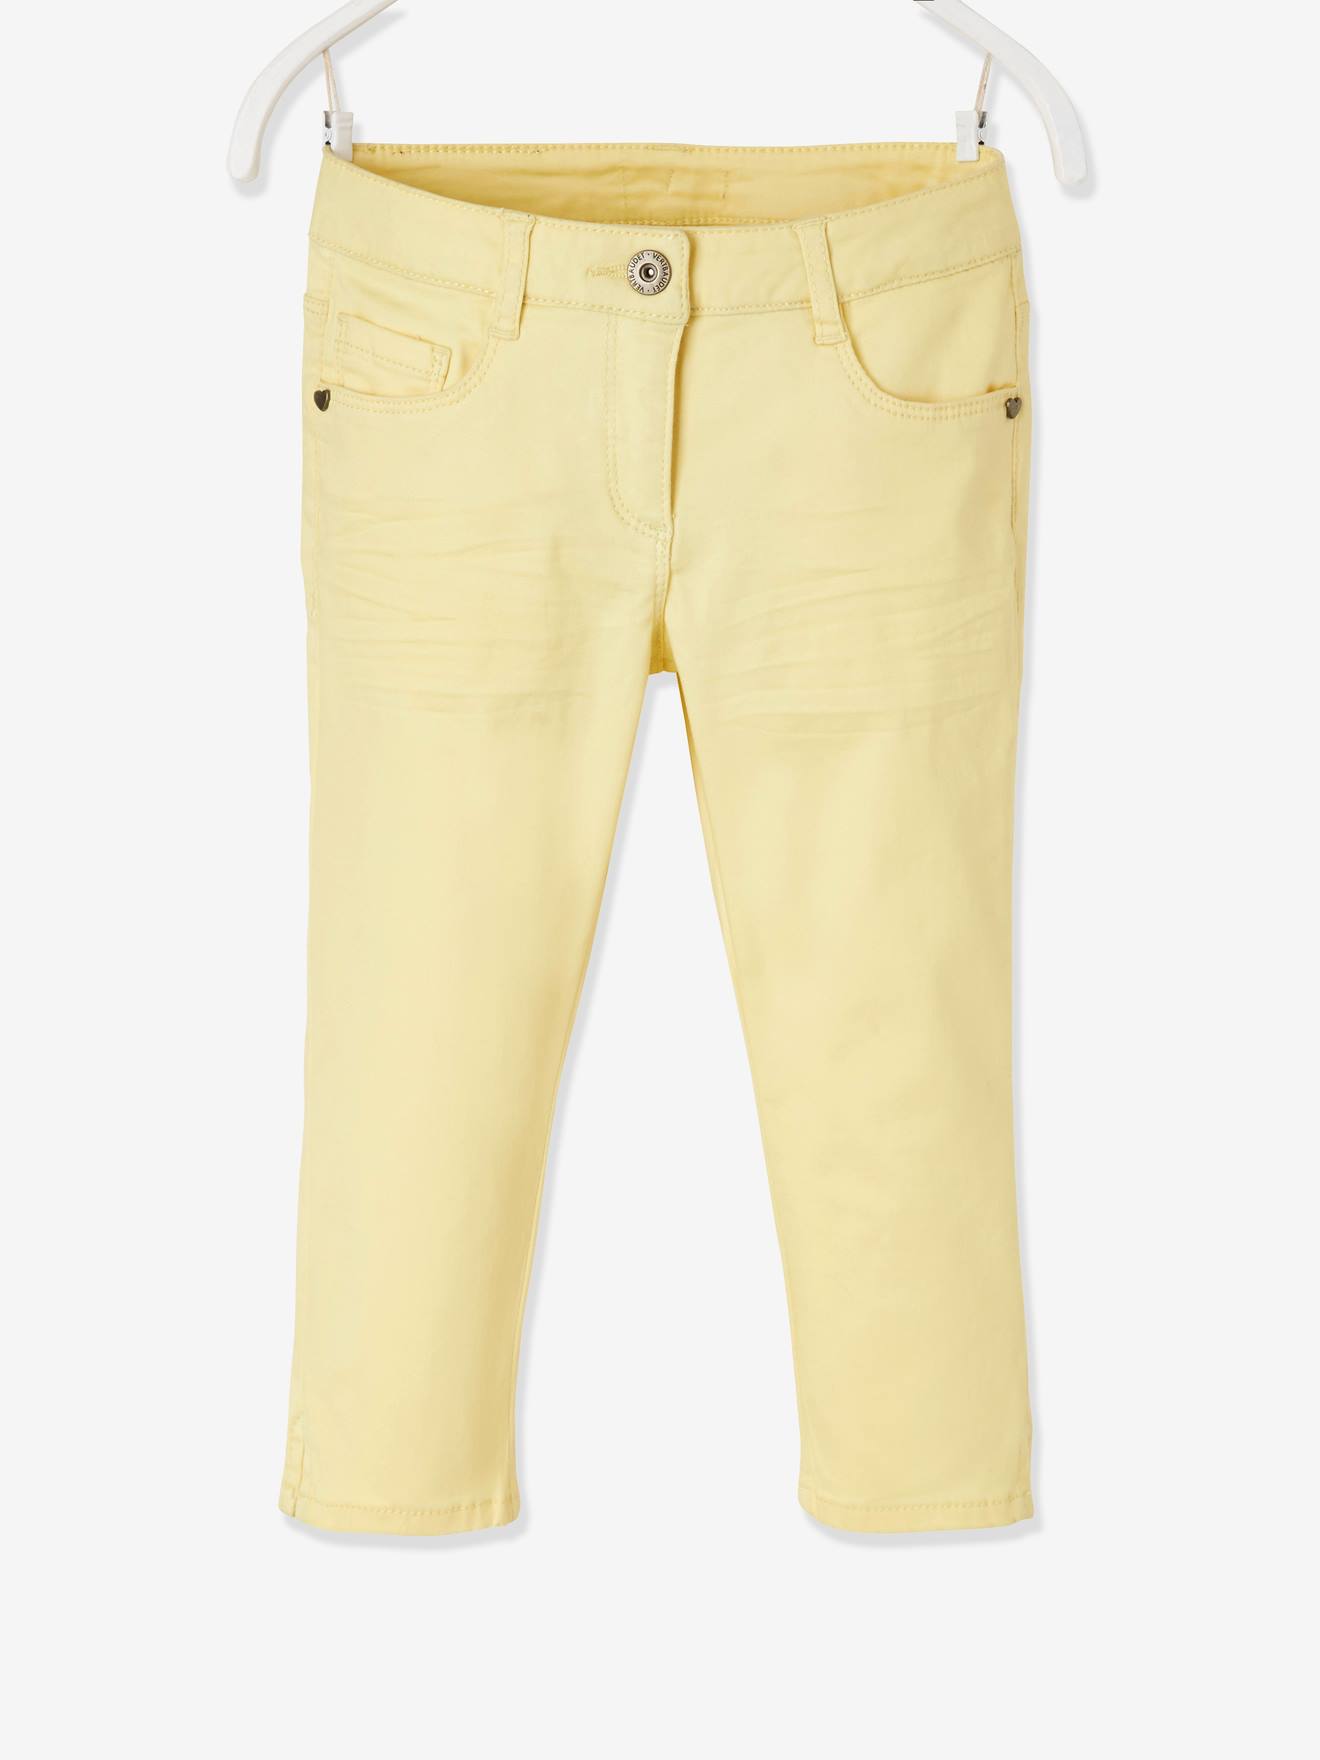 summer cut off trousers